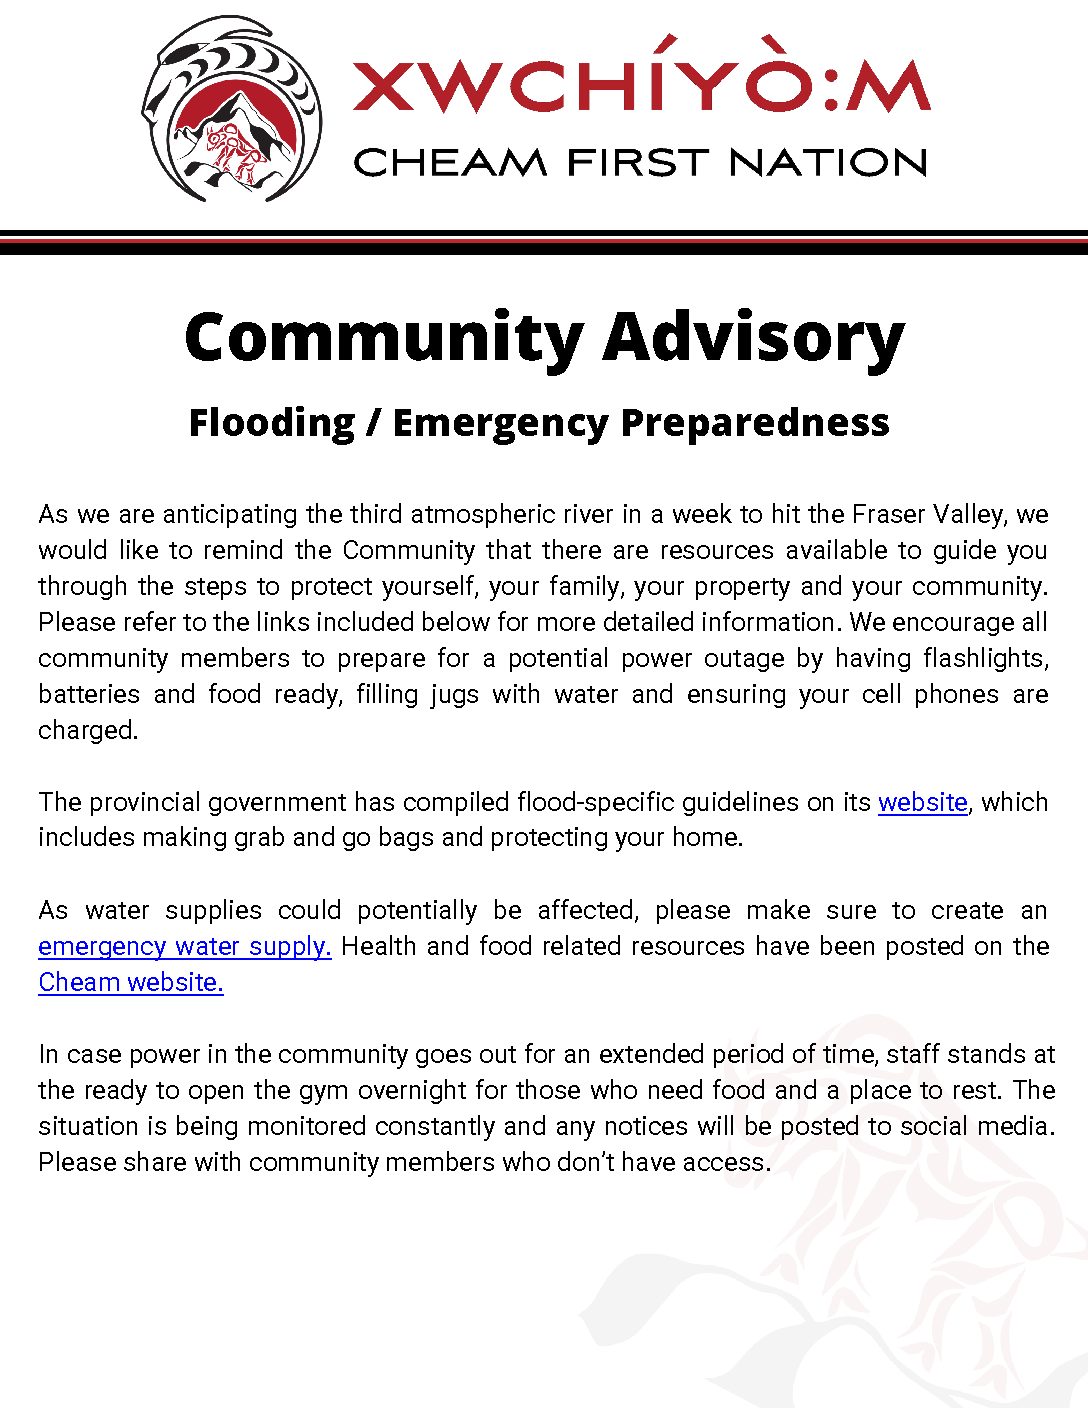 Community Notice – Ongoing Flooding Concerns / Emergency Preparedness Resources